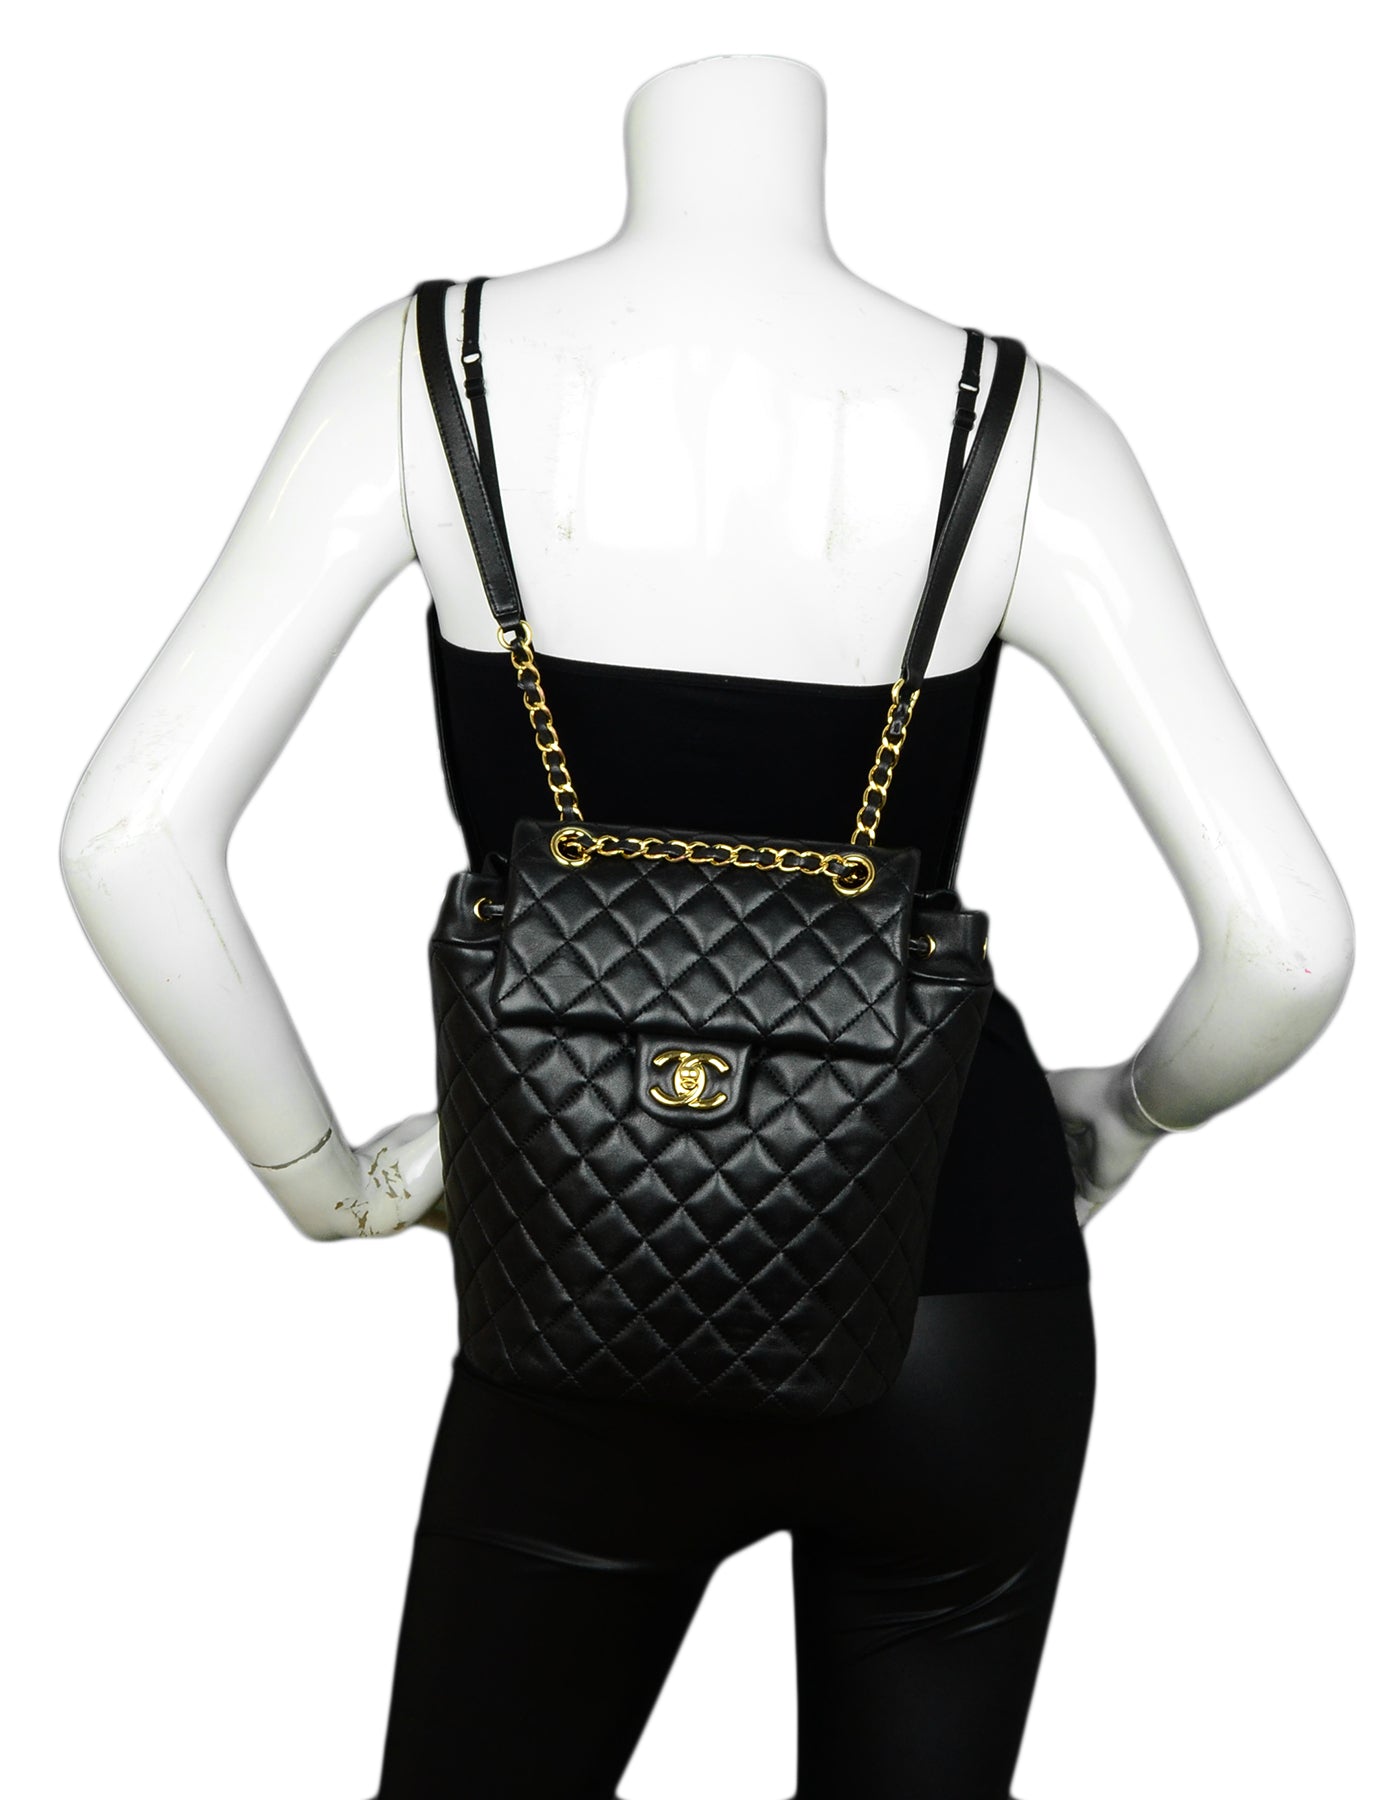 Urban Spirit Small Backpack  Rent Chanel Bag at Luxury Fashion Rentals